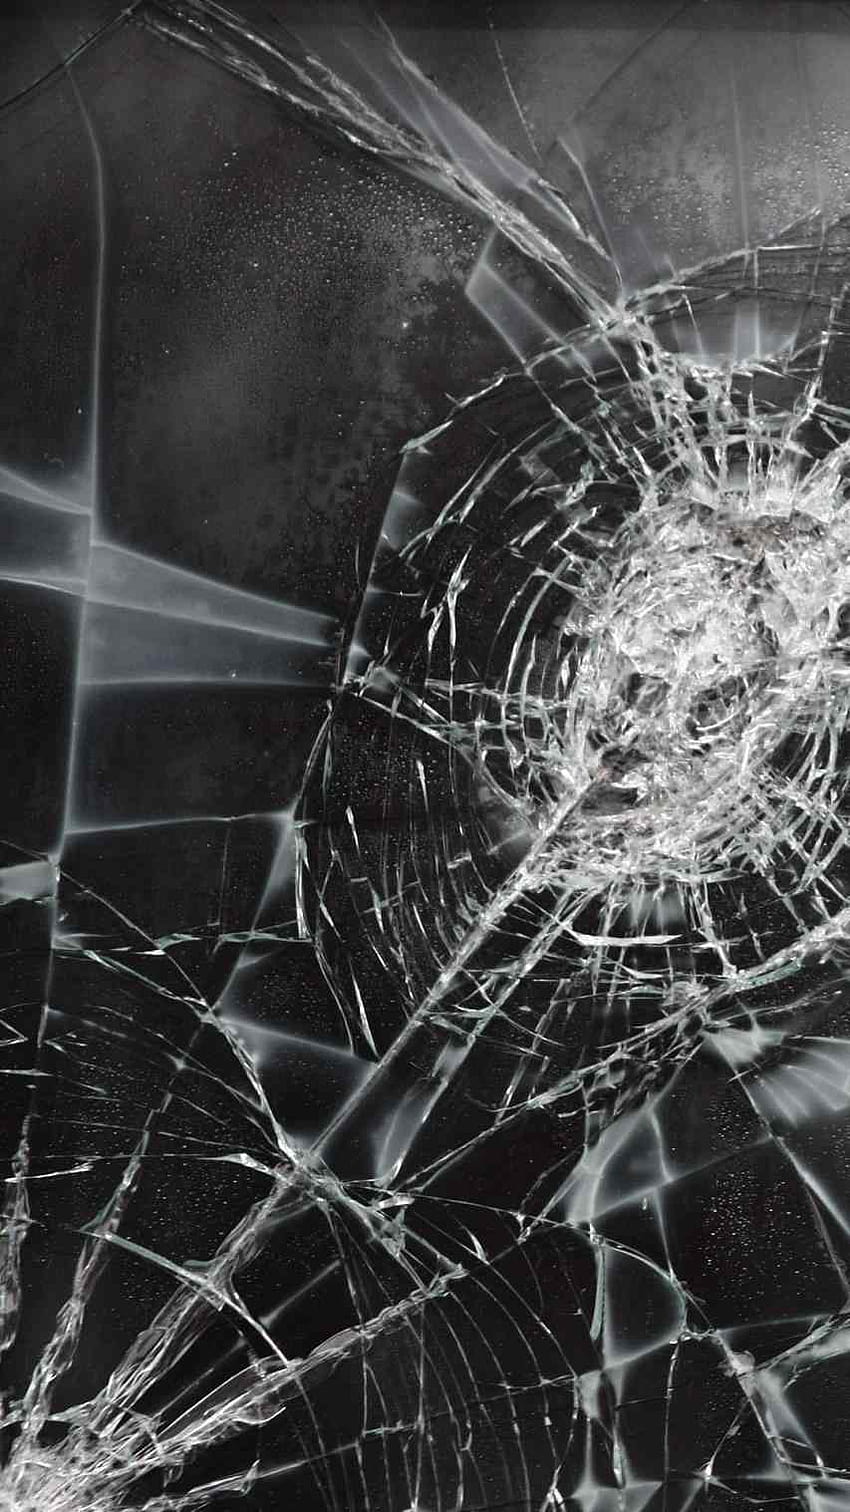 Broken Cracked Iphone Screen S For Apple And Best, apple cracked screen HD phone wallpaper